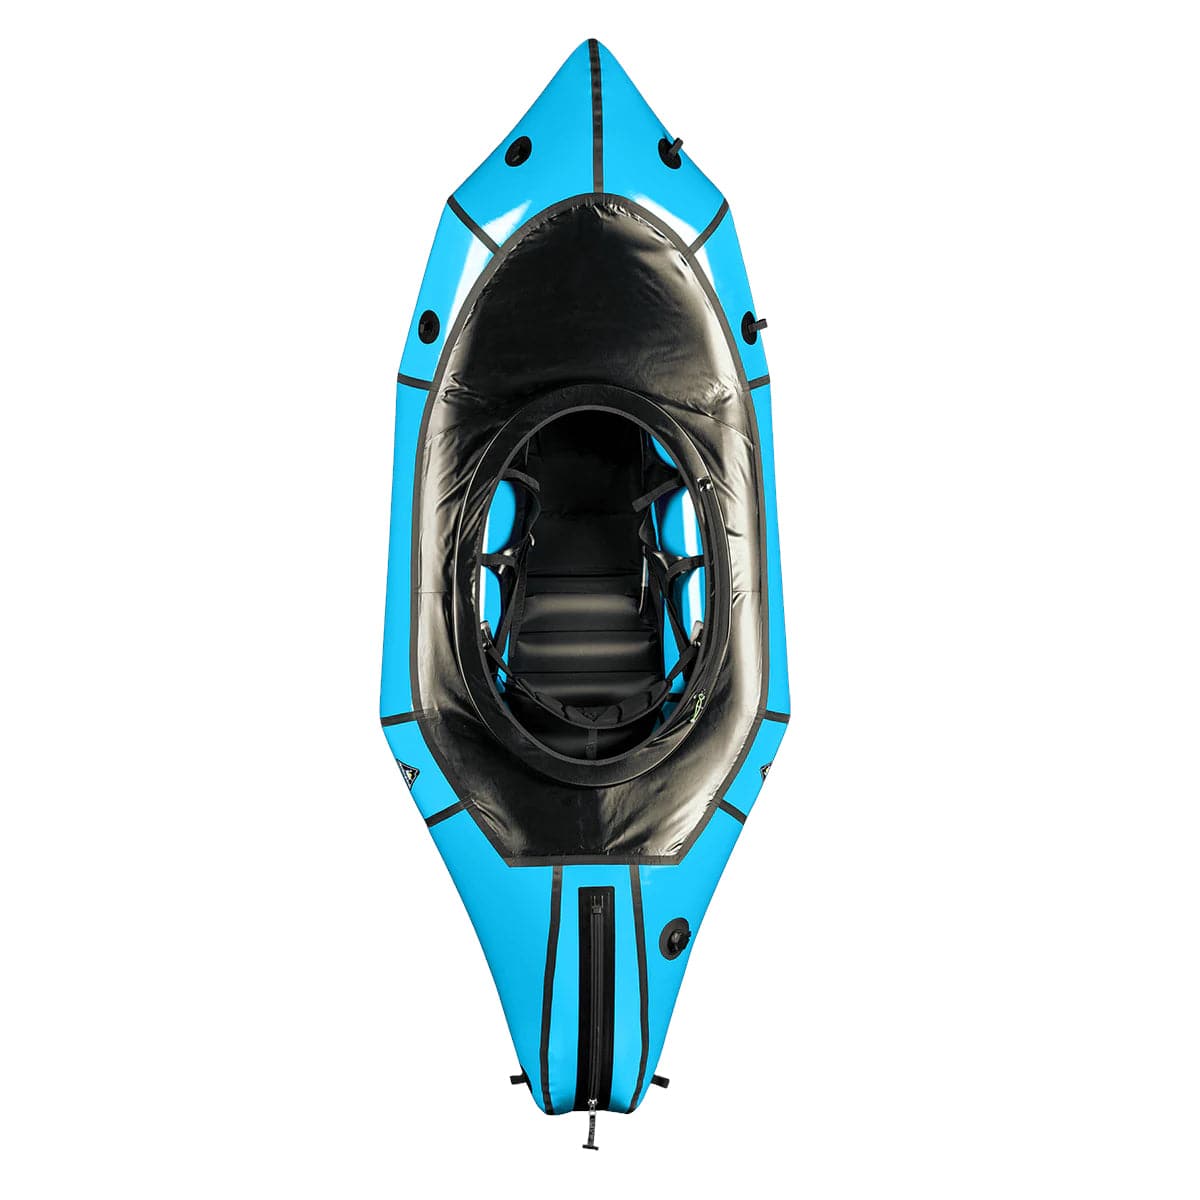 Featuring the Gnarwhal with Whitewater Deck pack raft manufactured by Alpacka shown here from one angle.